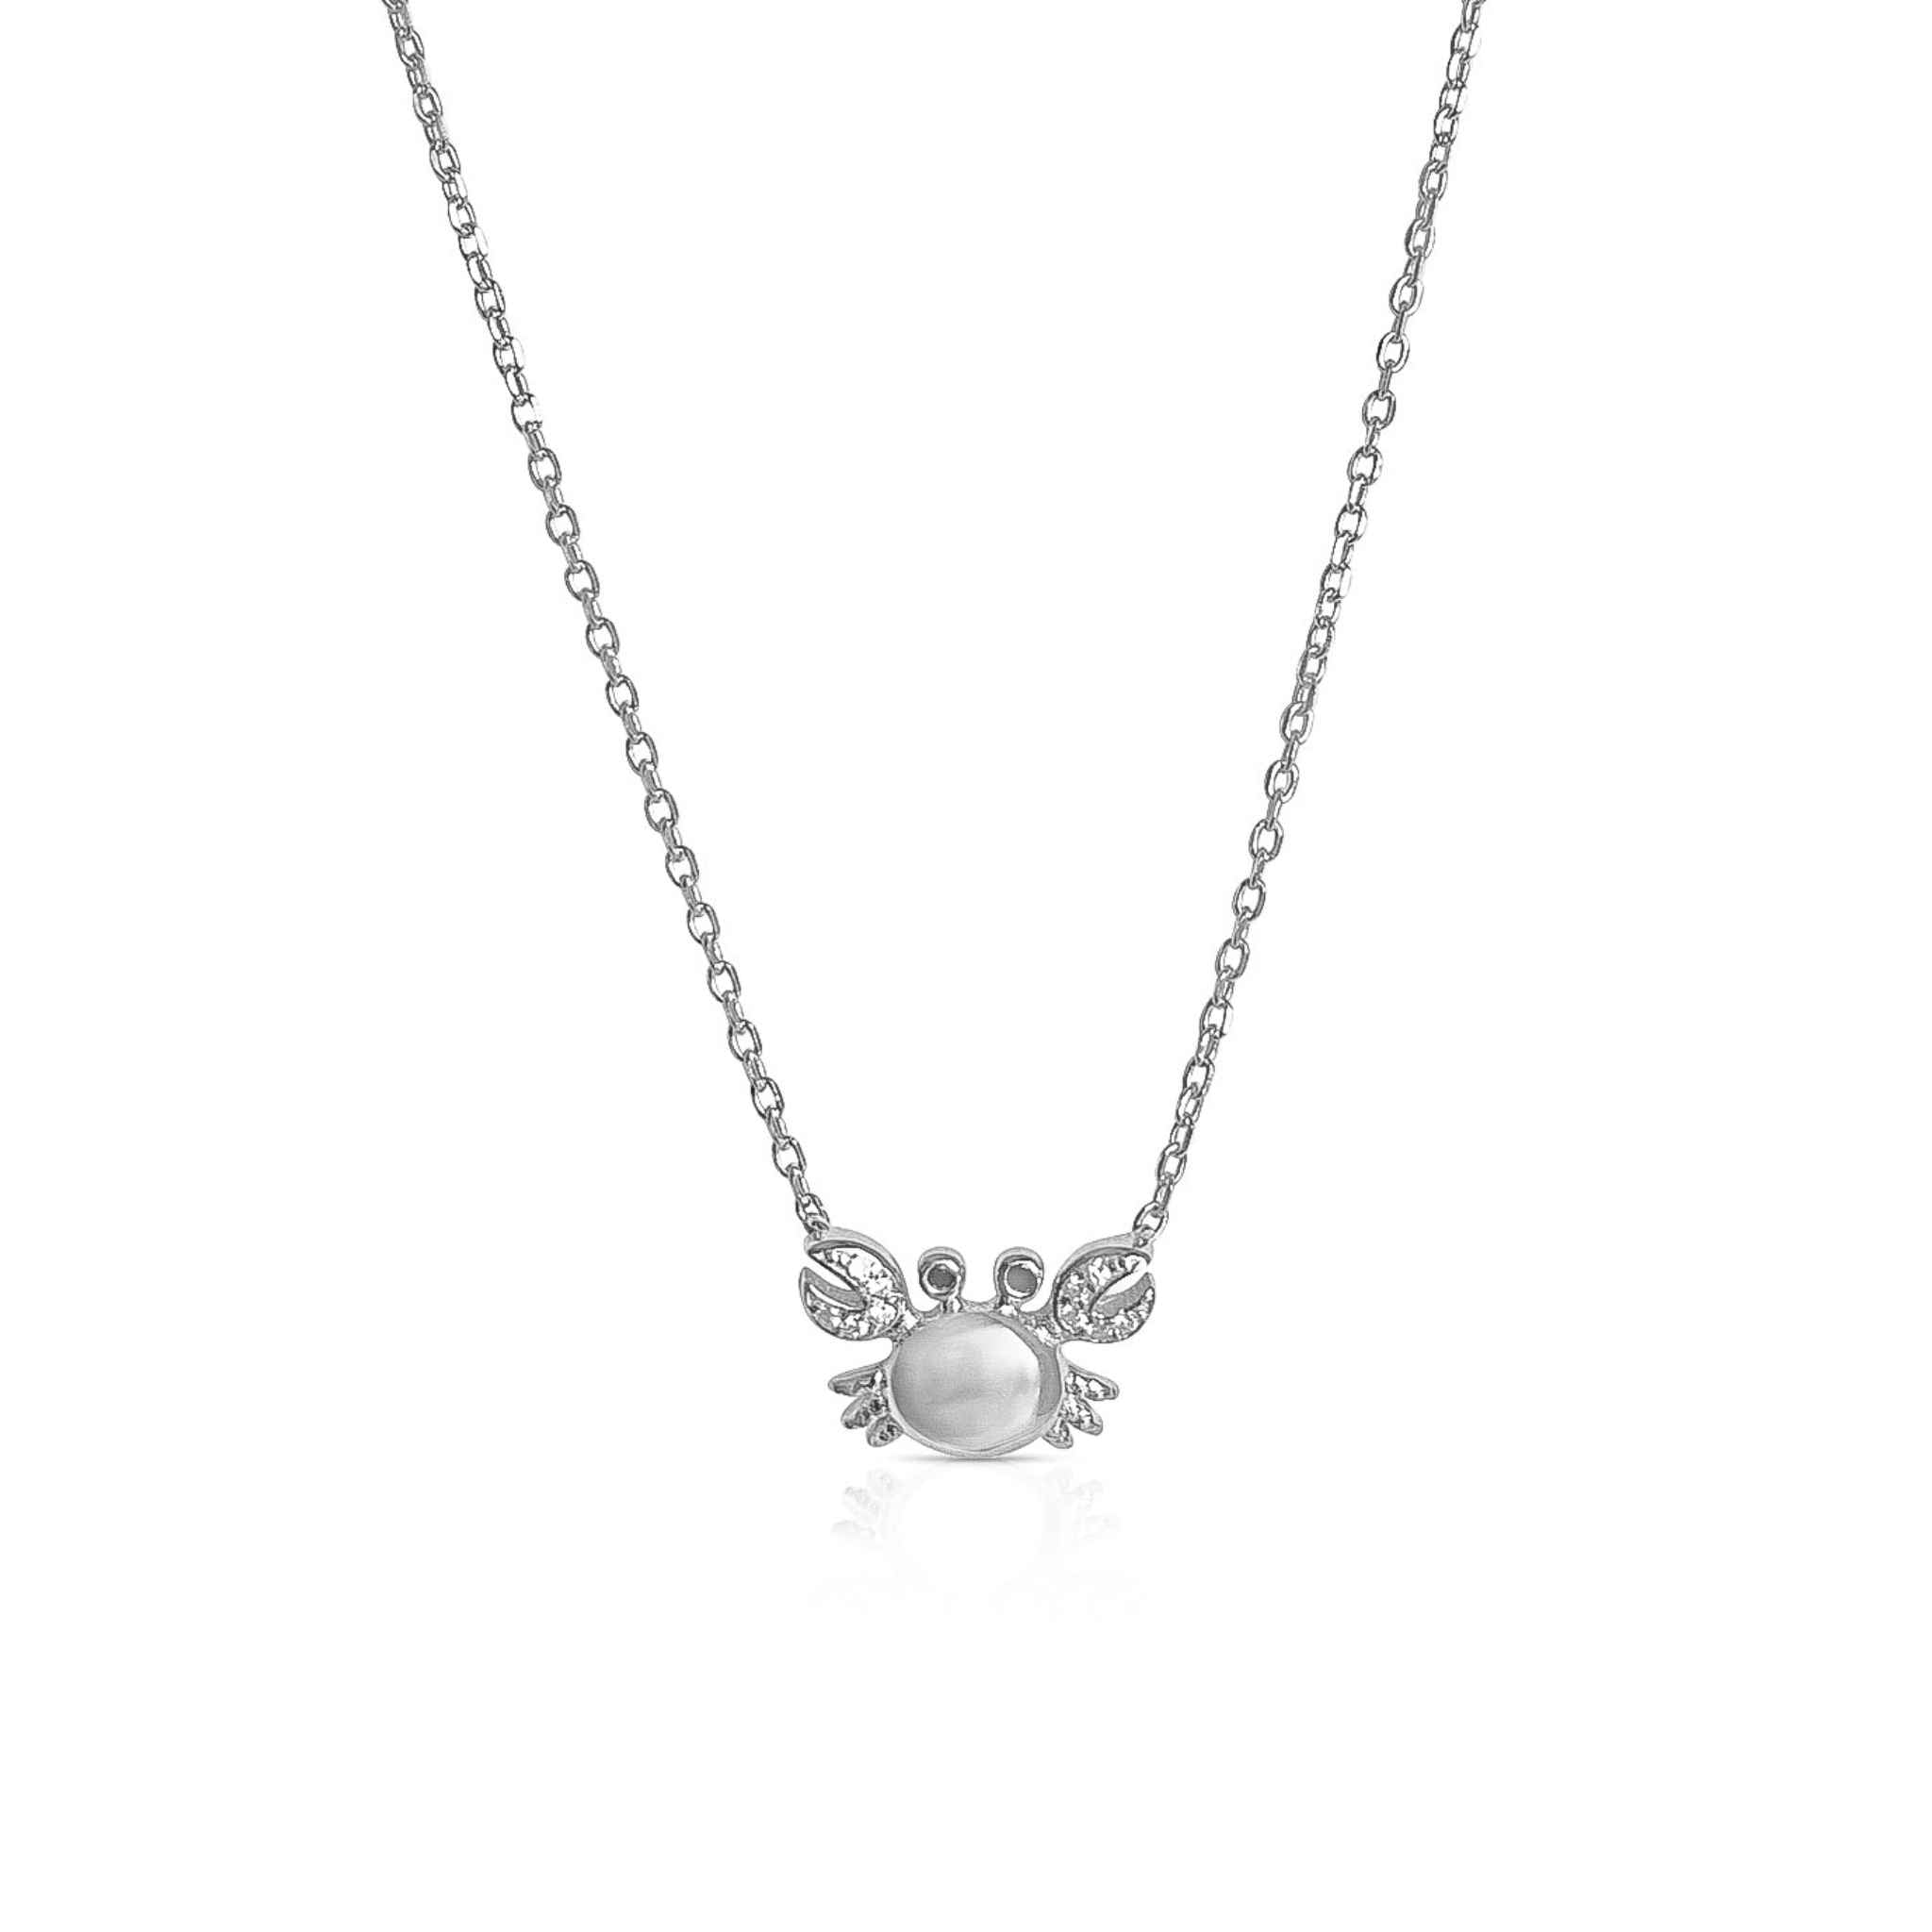 Sterling silver Crab Pendant Necklace with cubic zirconia claws from Alessandra James.